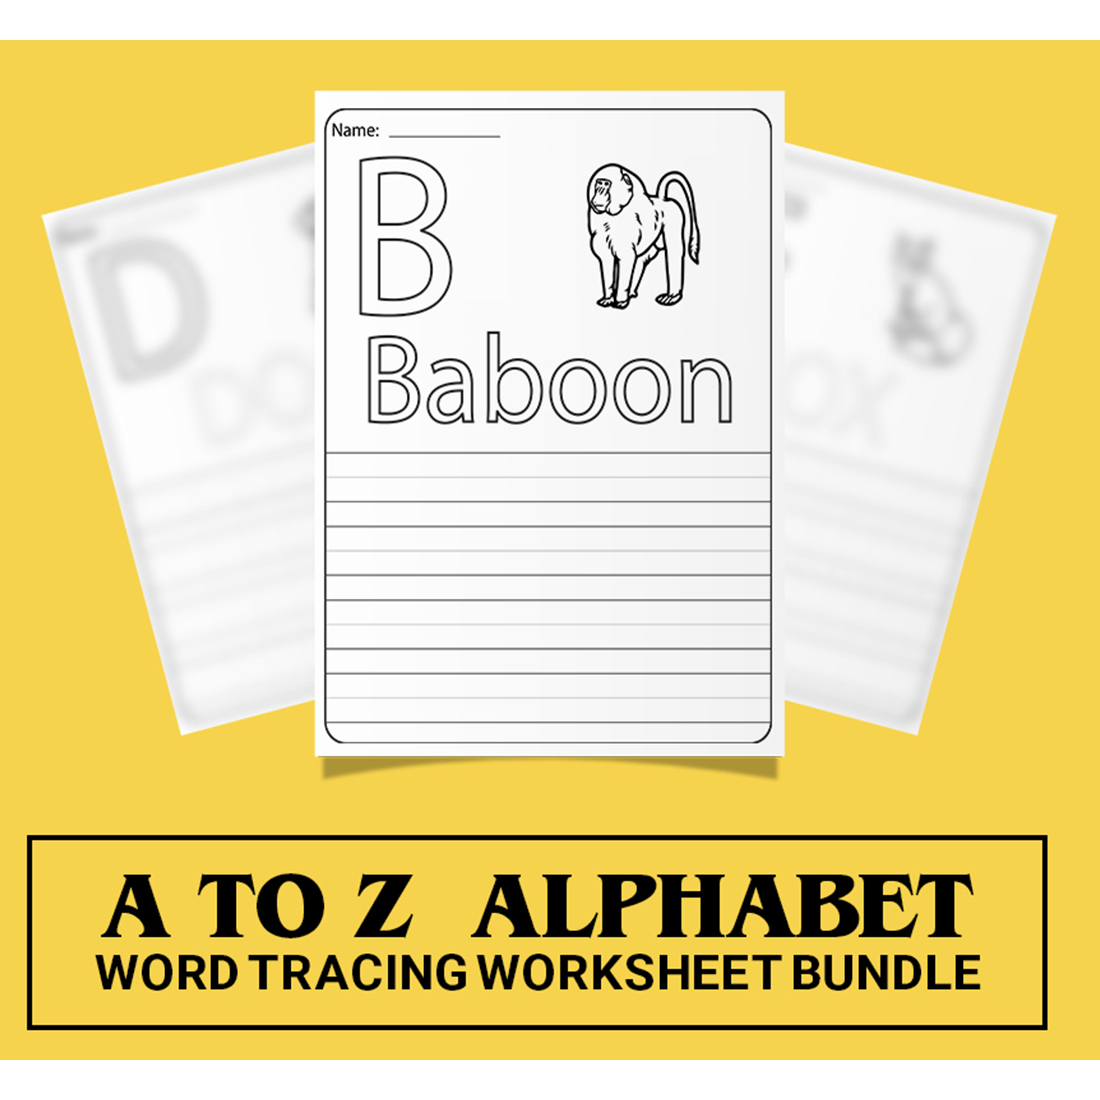 A collection of images of wonderful sheets for learning the alphabet